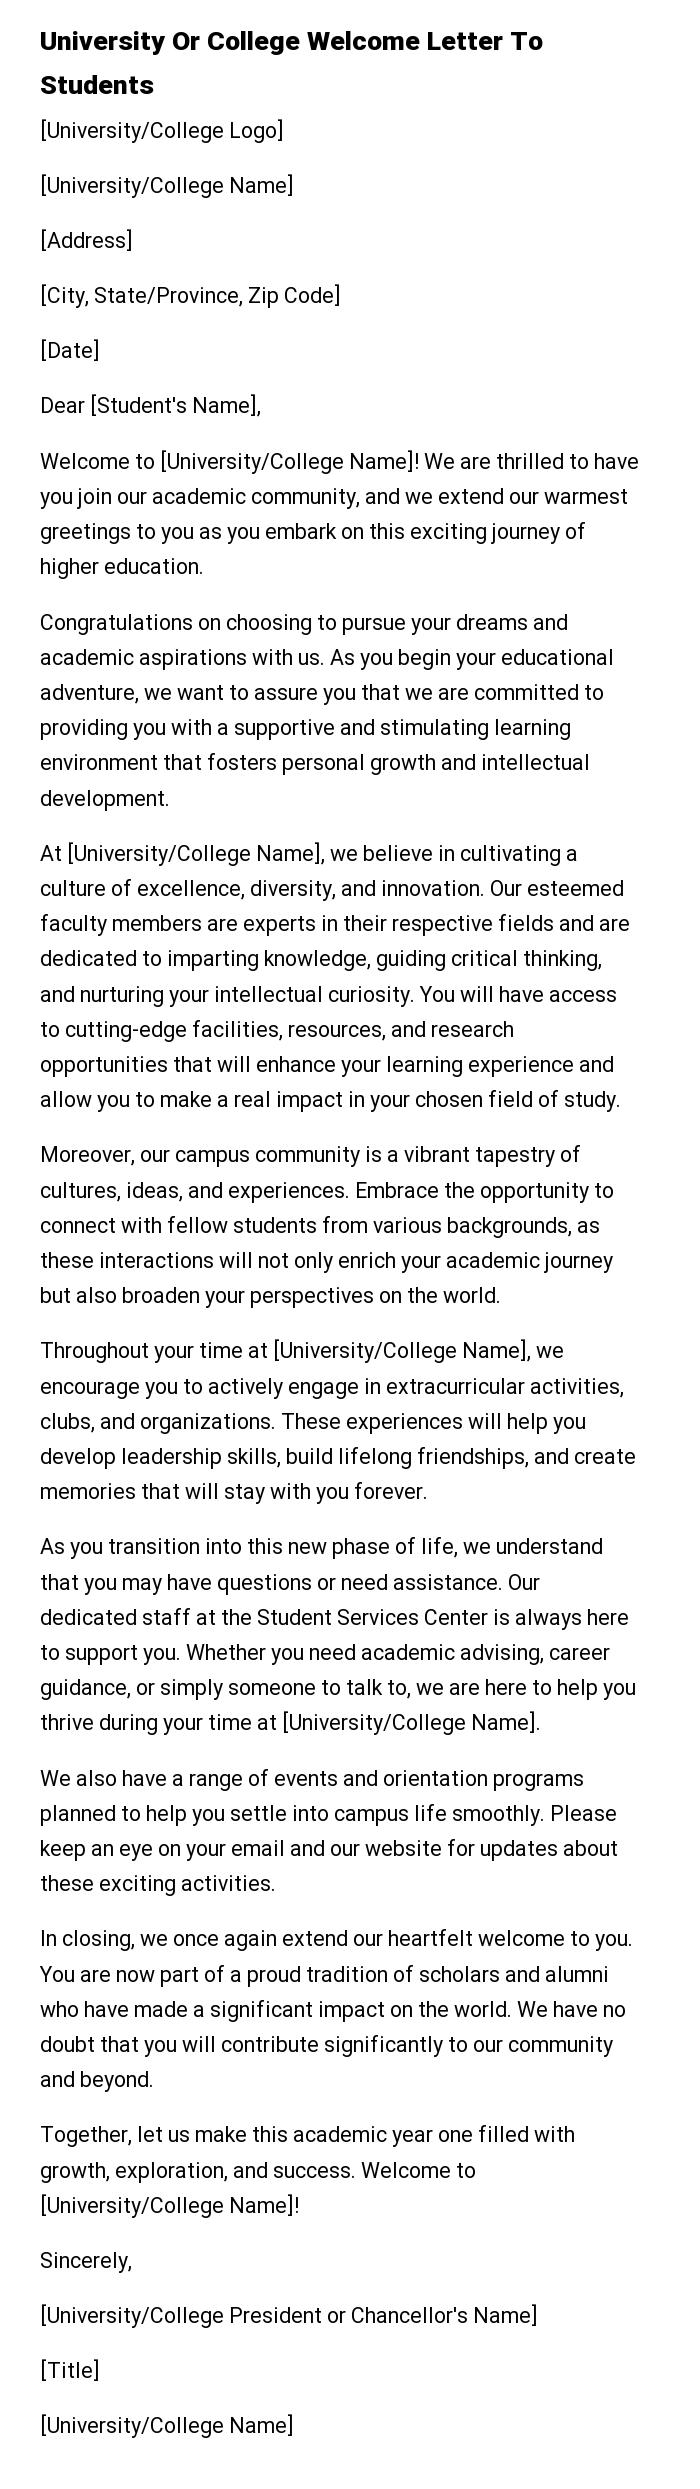 University Or College Welcome Letter To Students